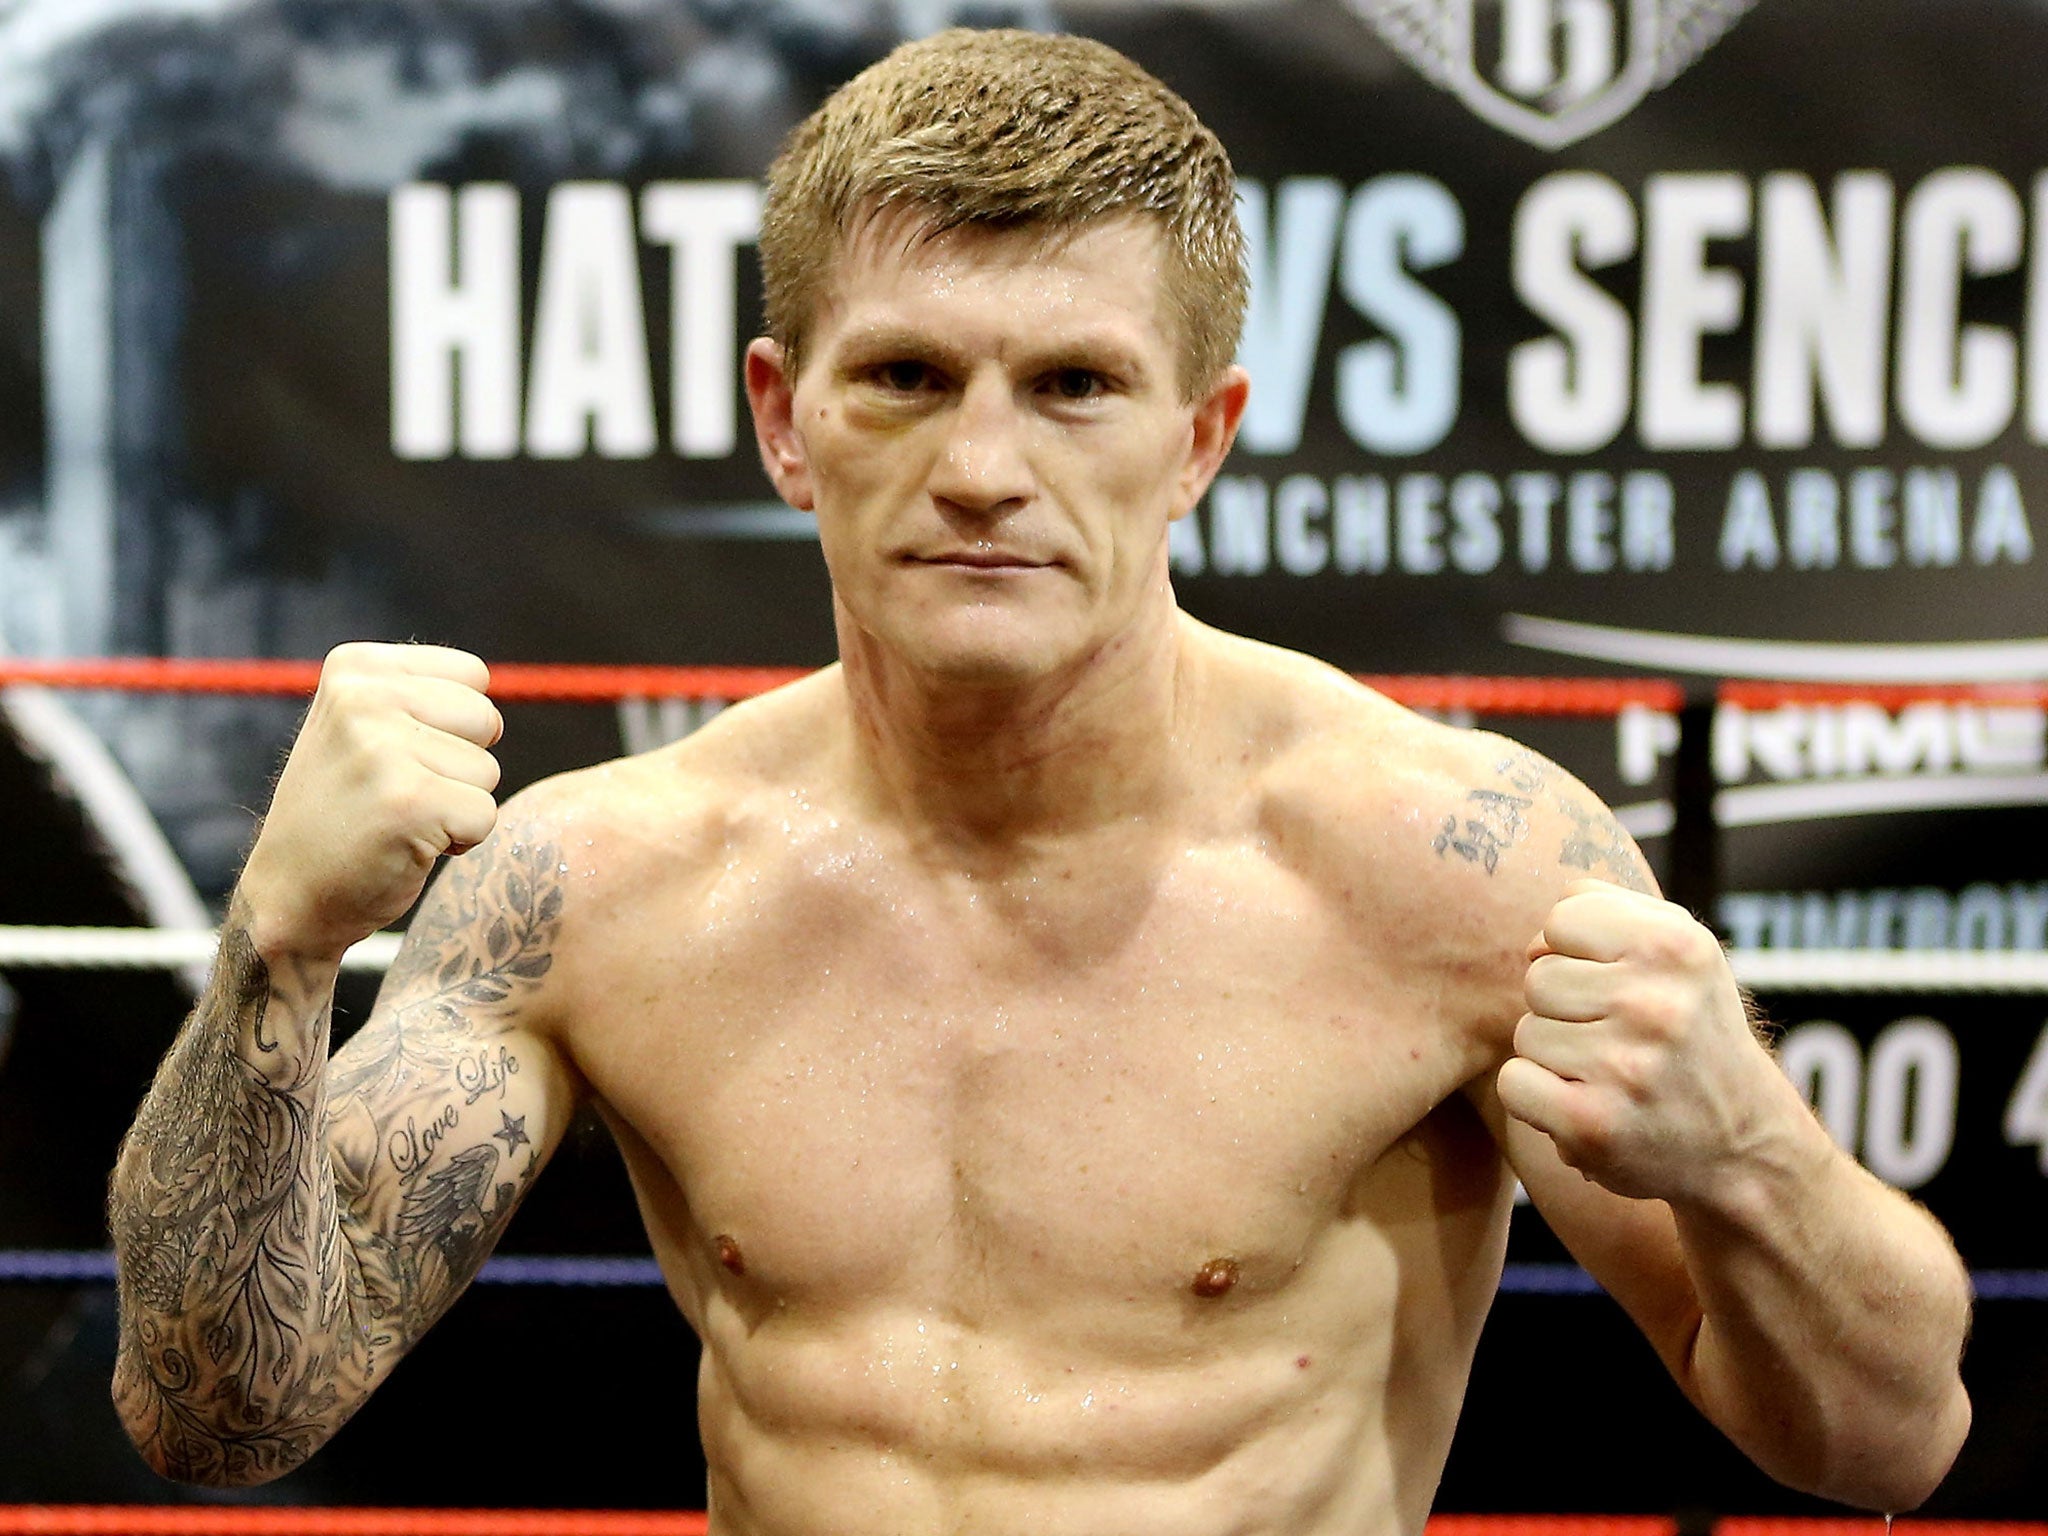 Ricky Hatton's house was burgled after he tweeted he'd be visiting London